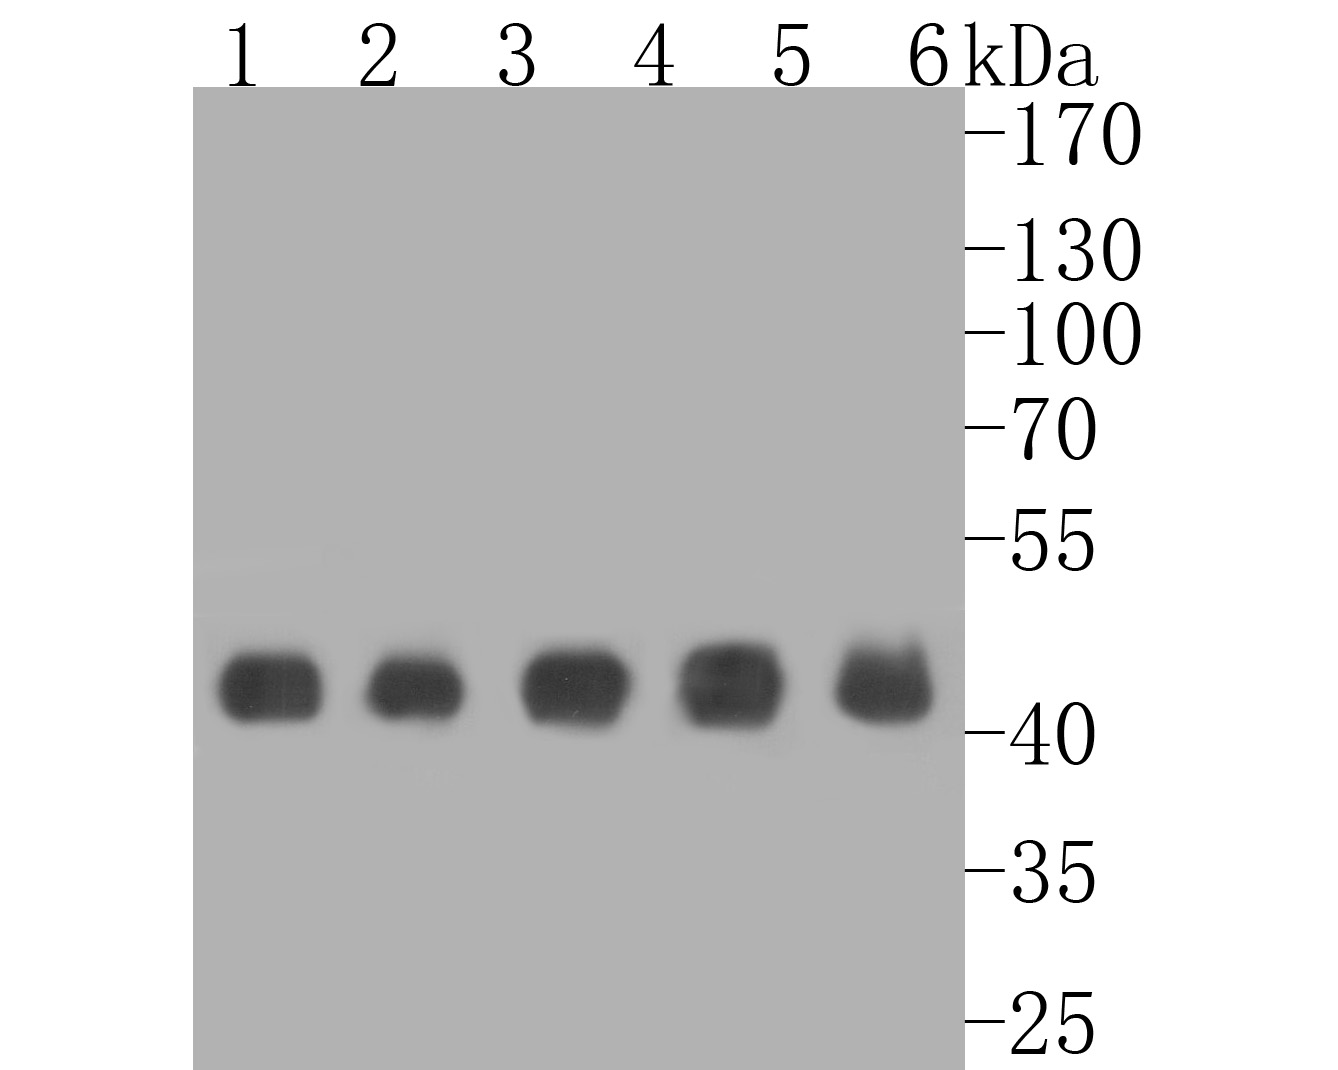 Western blot analysis of PGD on different lysates. Proteins were transferred to a PVDF membrane and blocked with 5% BSA in PBS for 1 hour at room temperature. The primary antibody (ET7111-12, 1/1,000) was used in 5% BSA at room temperature for 2 hours. Goat Anti-Rabbit IgG - HRP Secondary Antibody (HA1001) at 1:5,000 dilution was used for 1 hour at room temperature.<br />
Positive control: <br />
Lane 1: Mouse liver tissue lysate<br />
Lane 2: Mouse placenta tissue lysate<br />
Lane 3: Rat spleen tissue lysate<br />
Lane 4: Rat testis tissue lysate<br />
Lane 5: Mouse brain tissue lysate